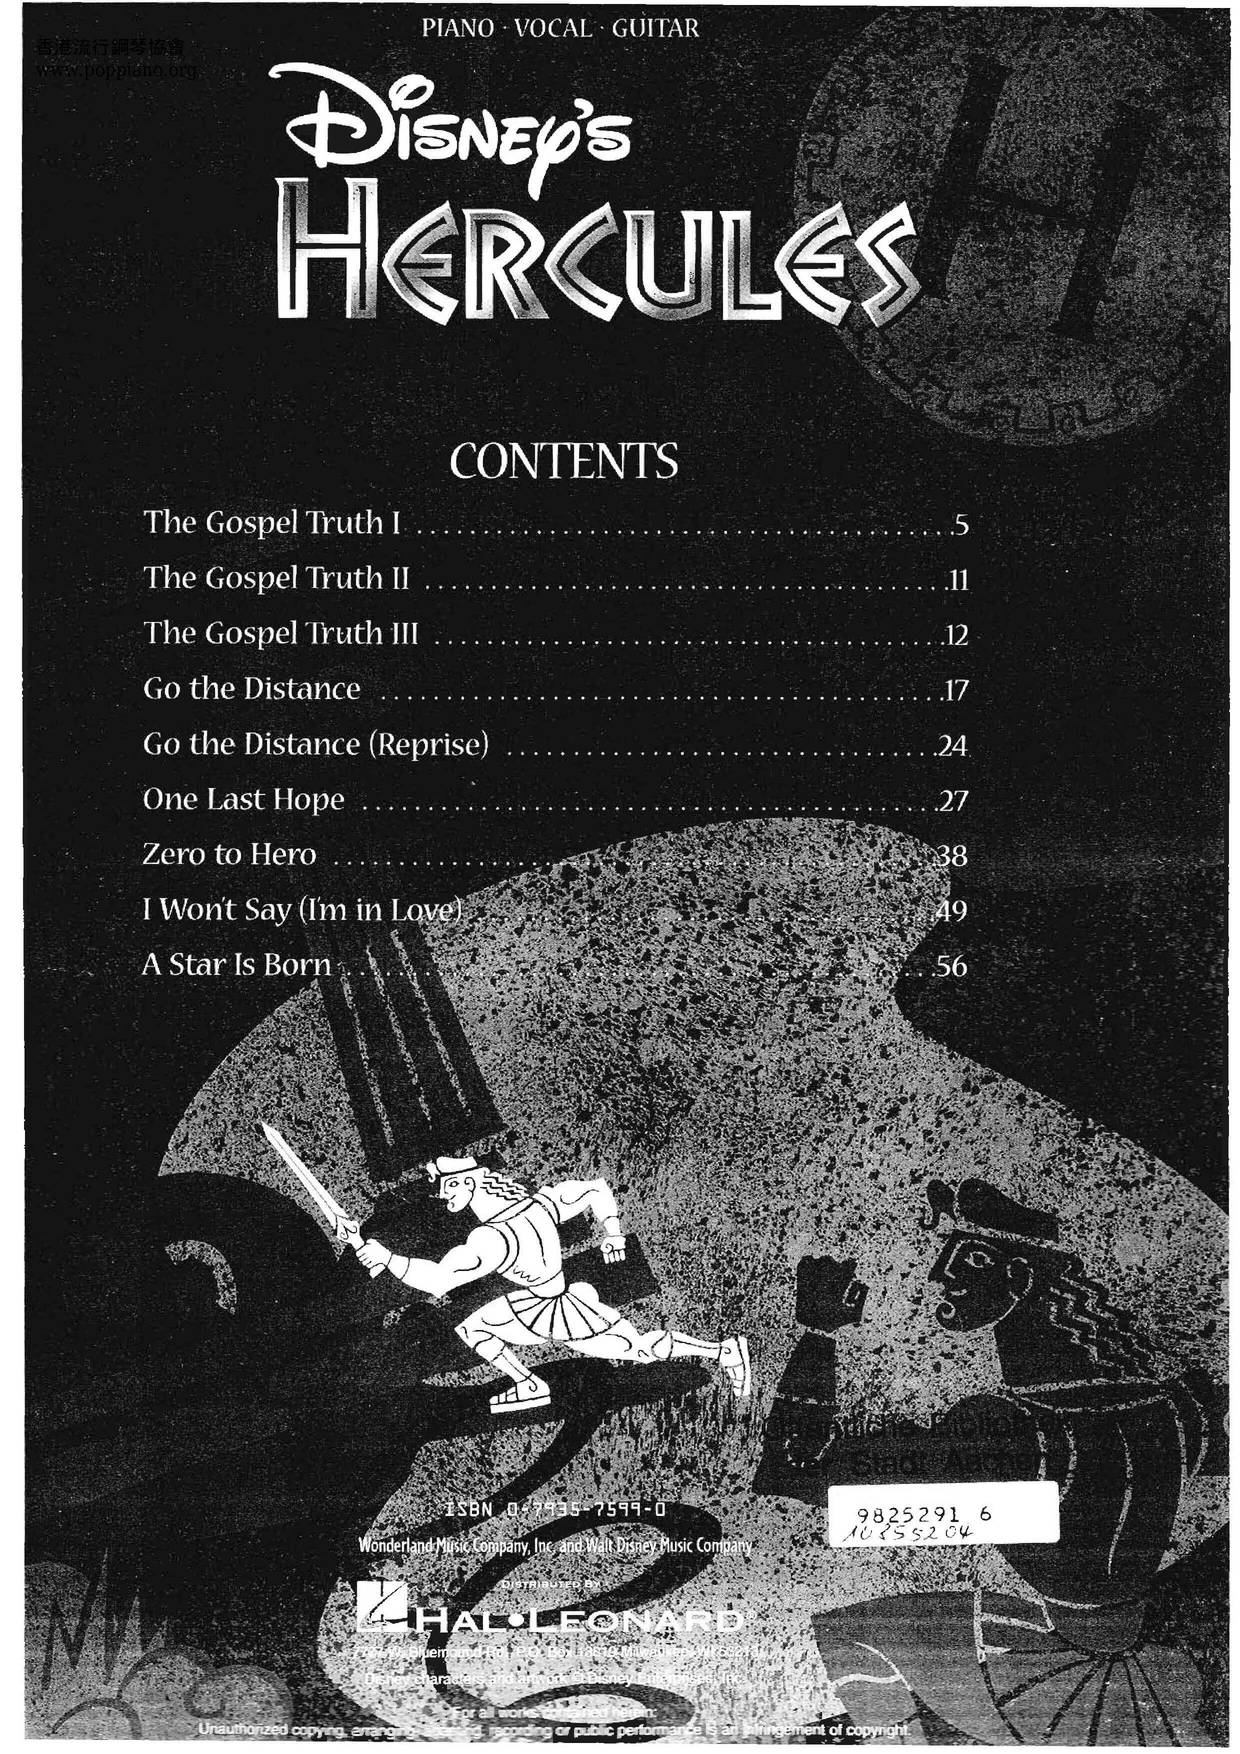 Hercules - Song Book 48 Pages Score